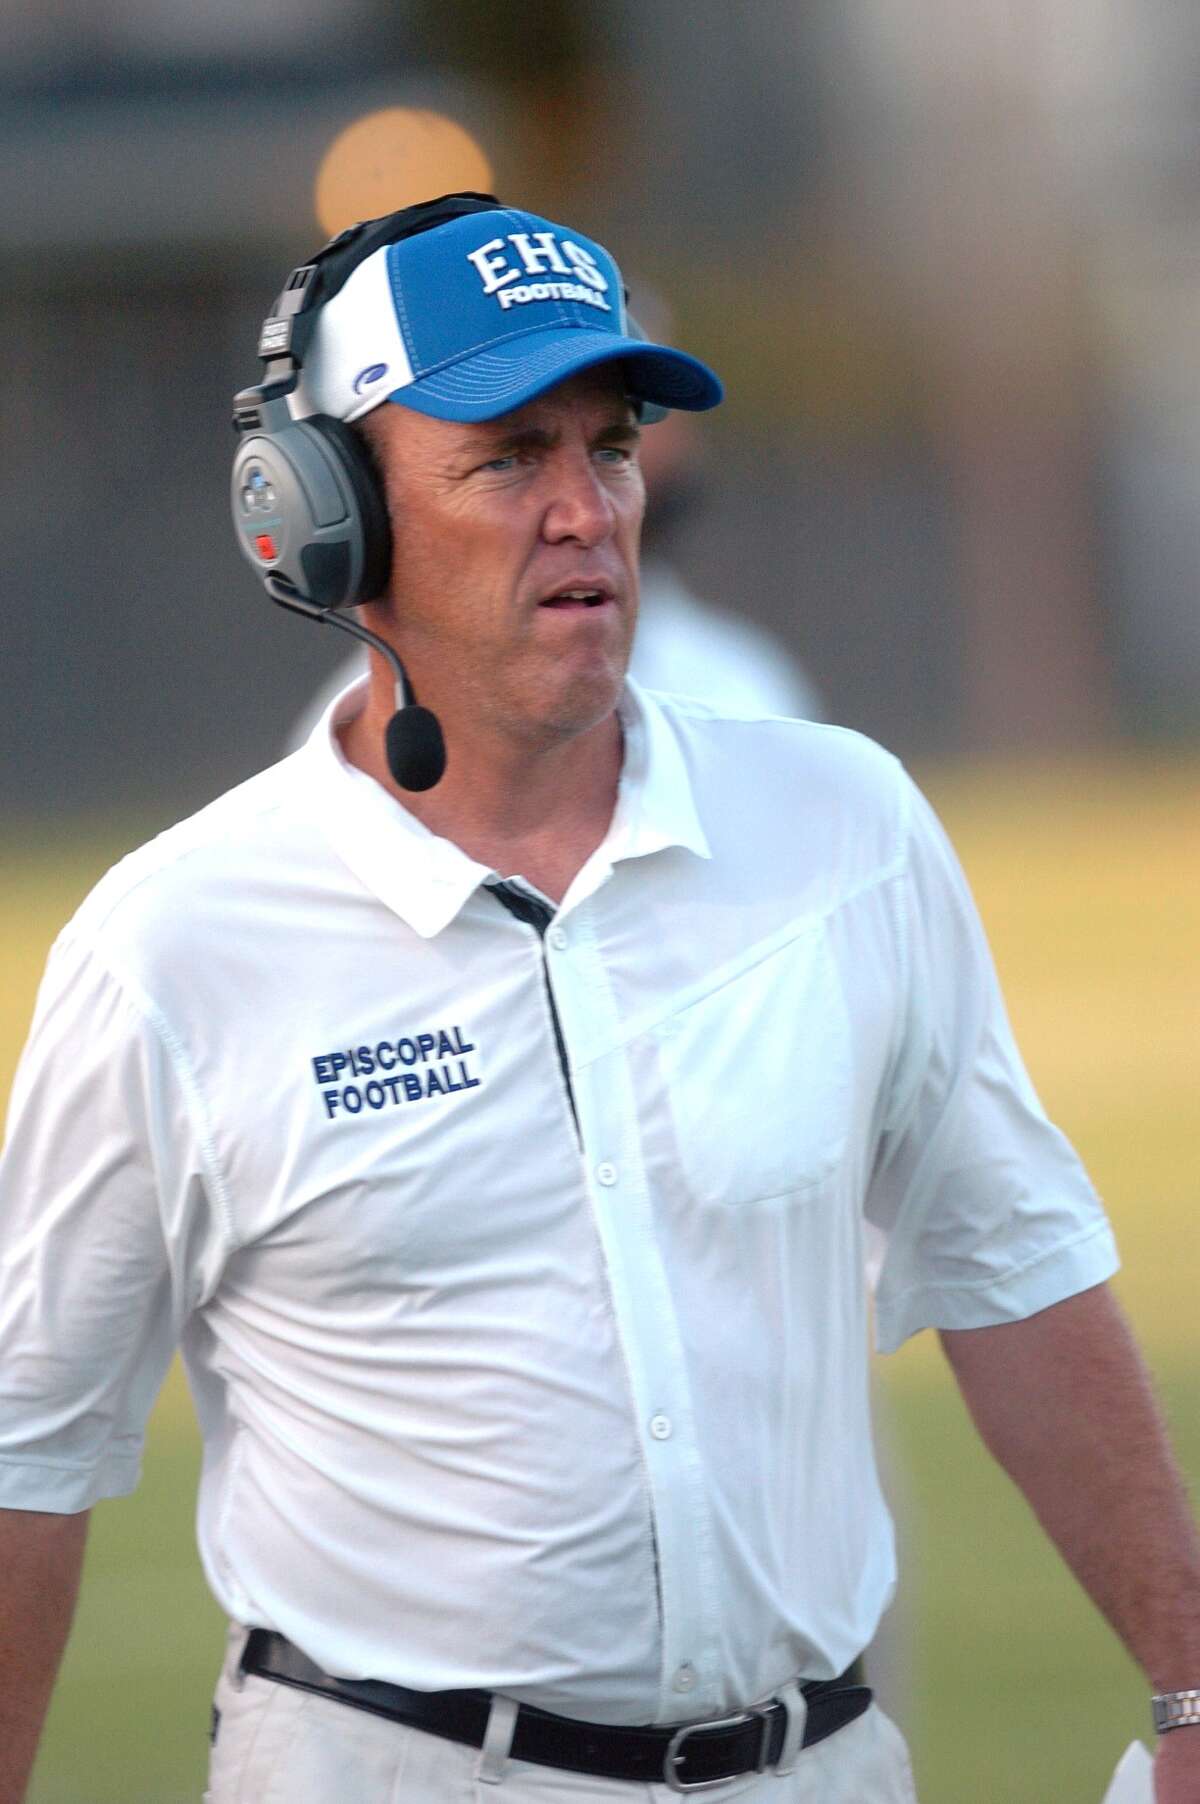 Episcopal football coach Steve Leisz saw plenty to like during spring practices.